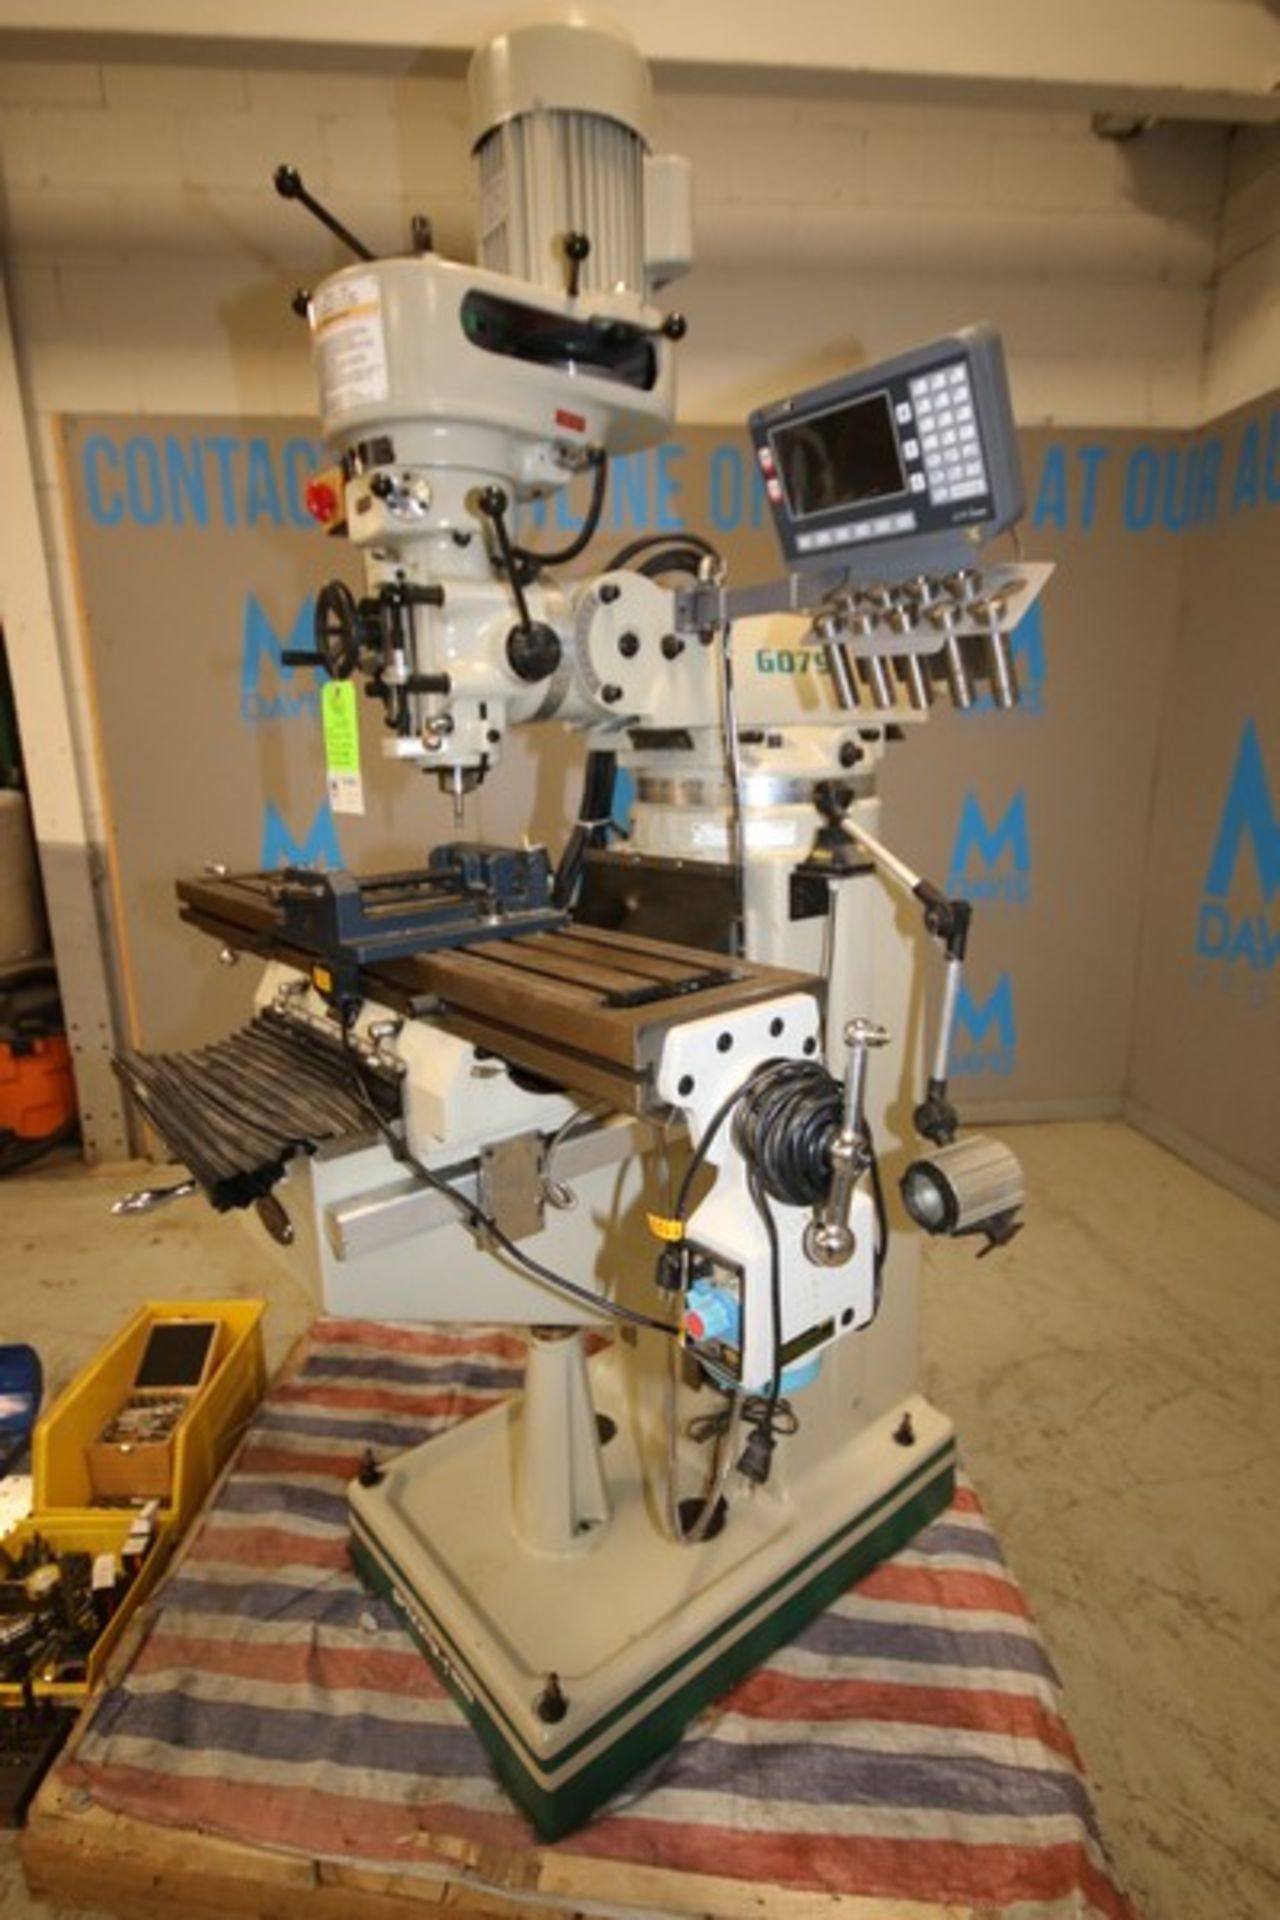 2021 Grizzly 9" x 49" Vertical Milling Machine, Model G0796, SN A200492, with Goxh LCD i500 Touch - Image 5 of 13